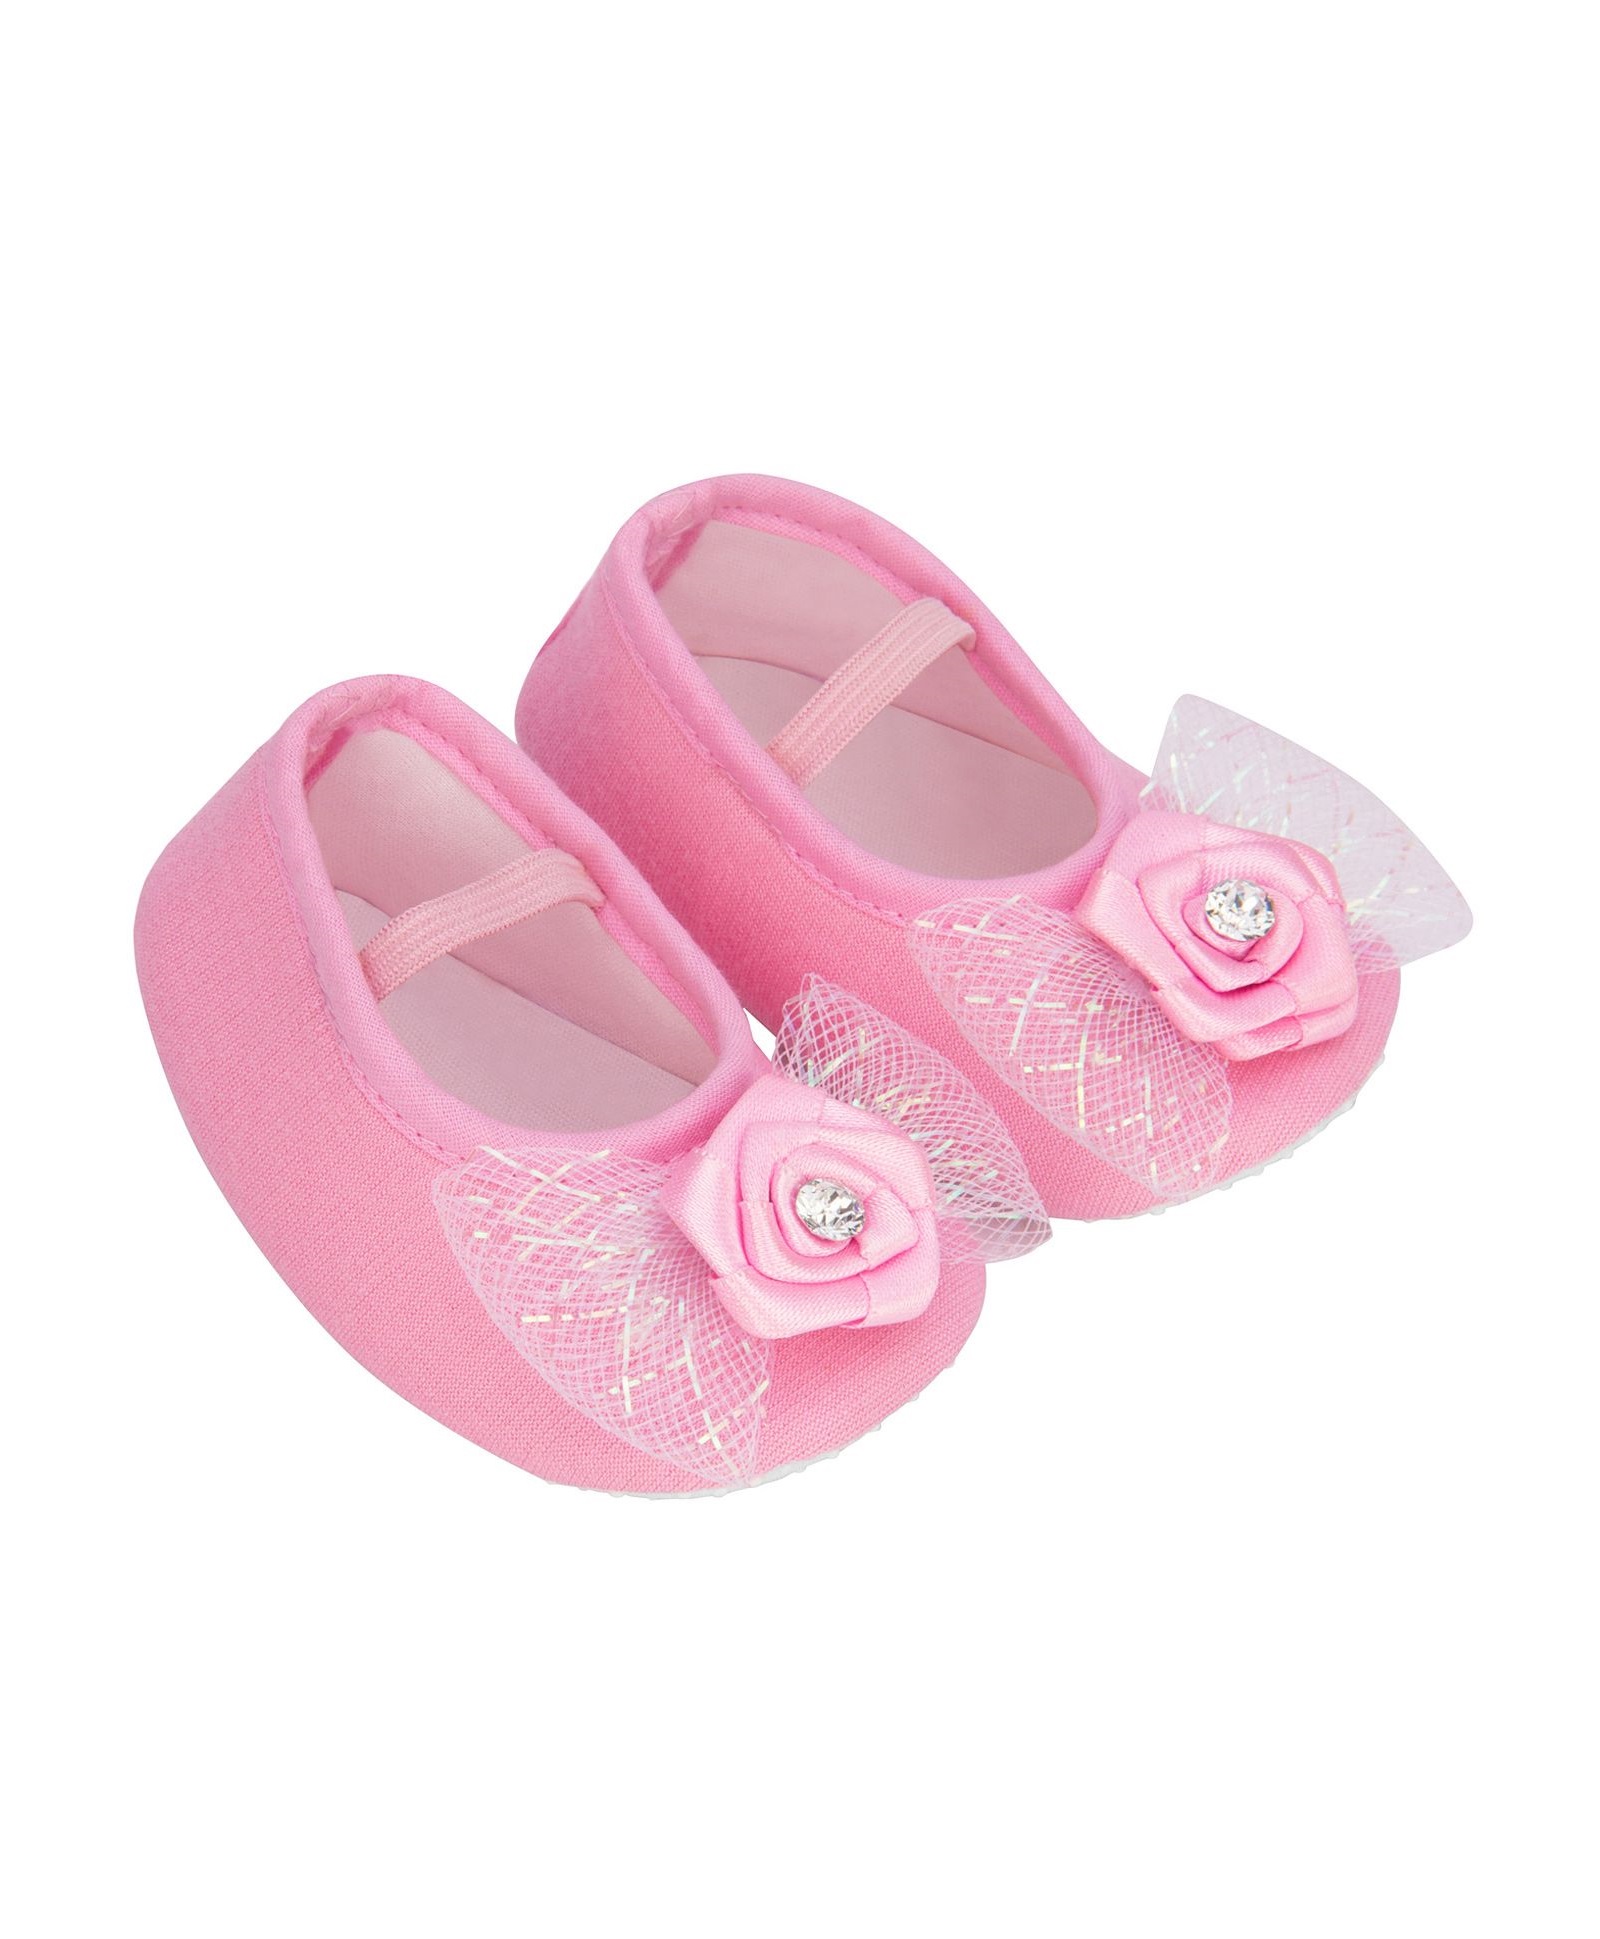 Stylish Cotton Booties for Little Baby Girl